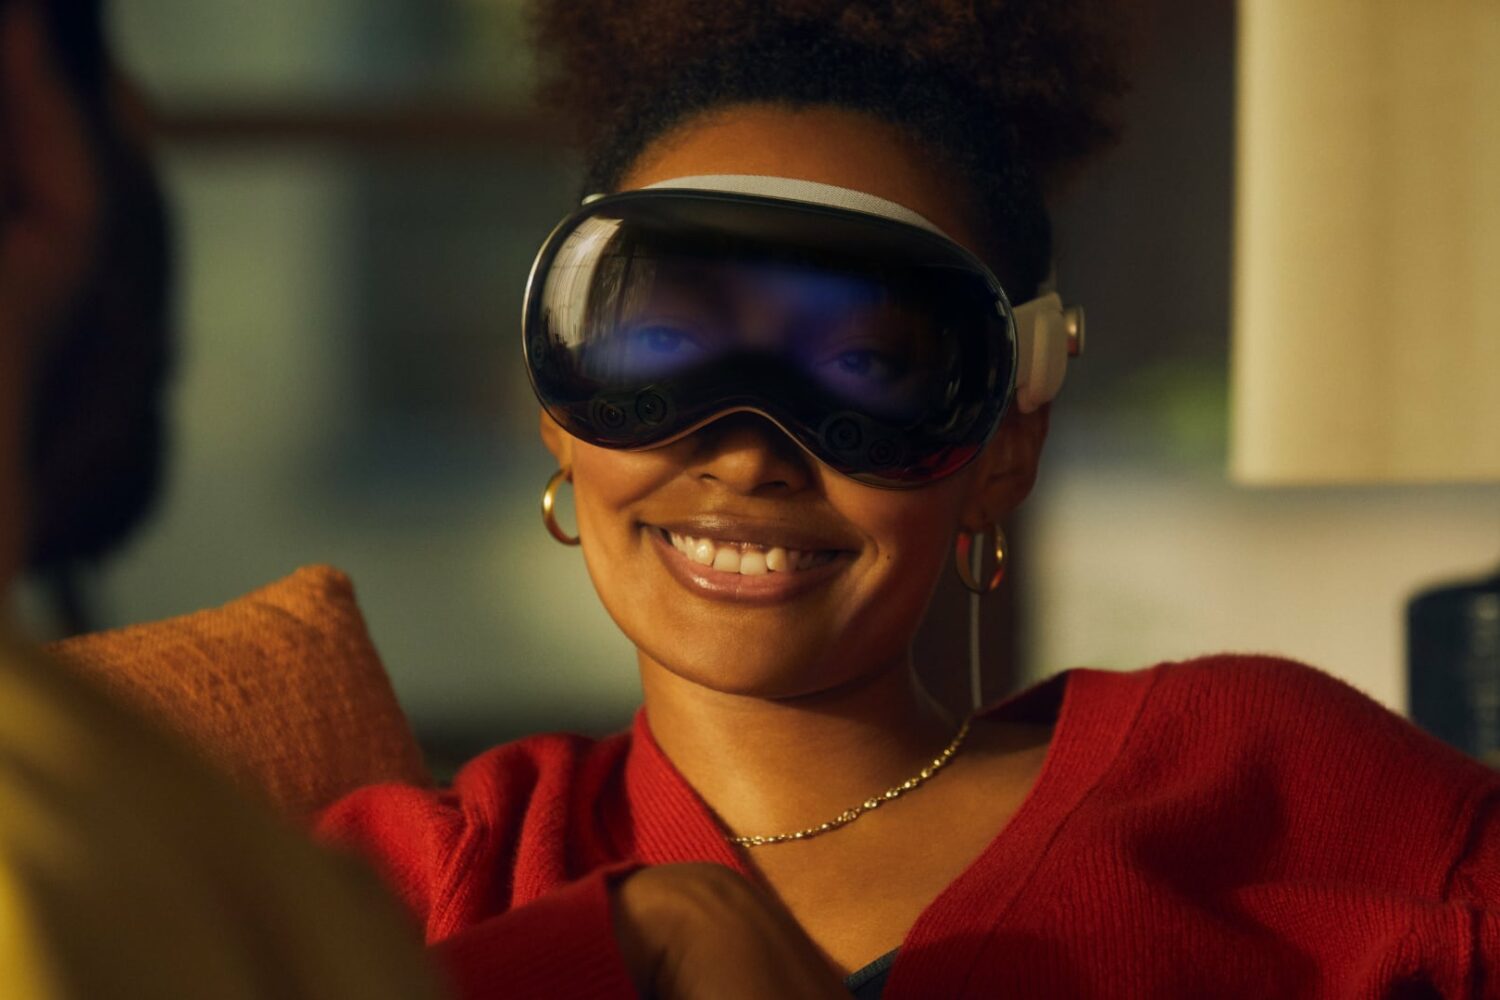 Woman wearing Apple's Vision Pro headset with her digital eyes showing on the front